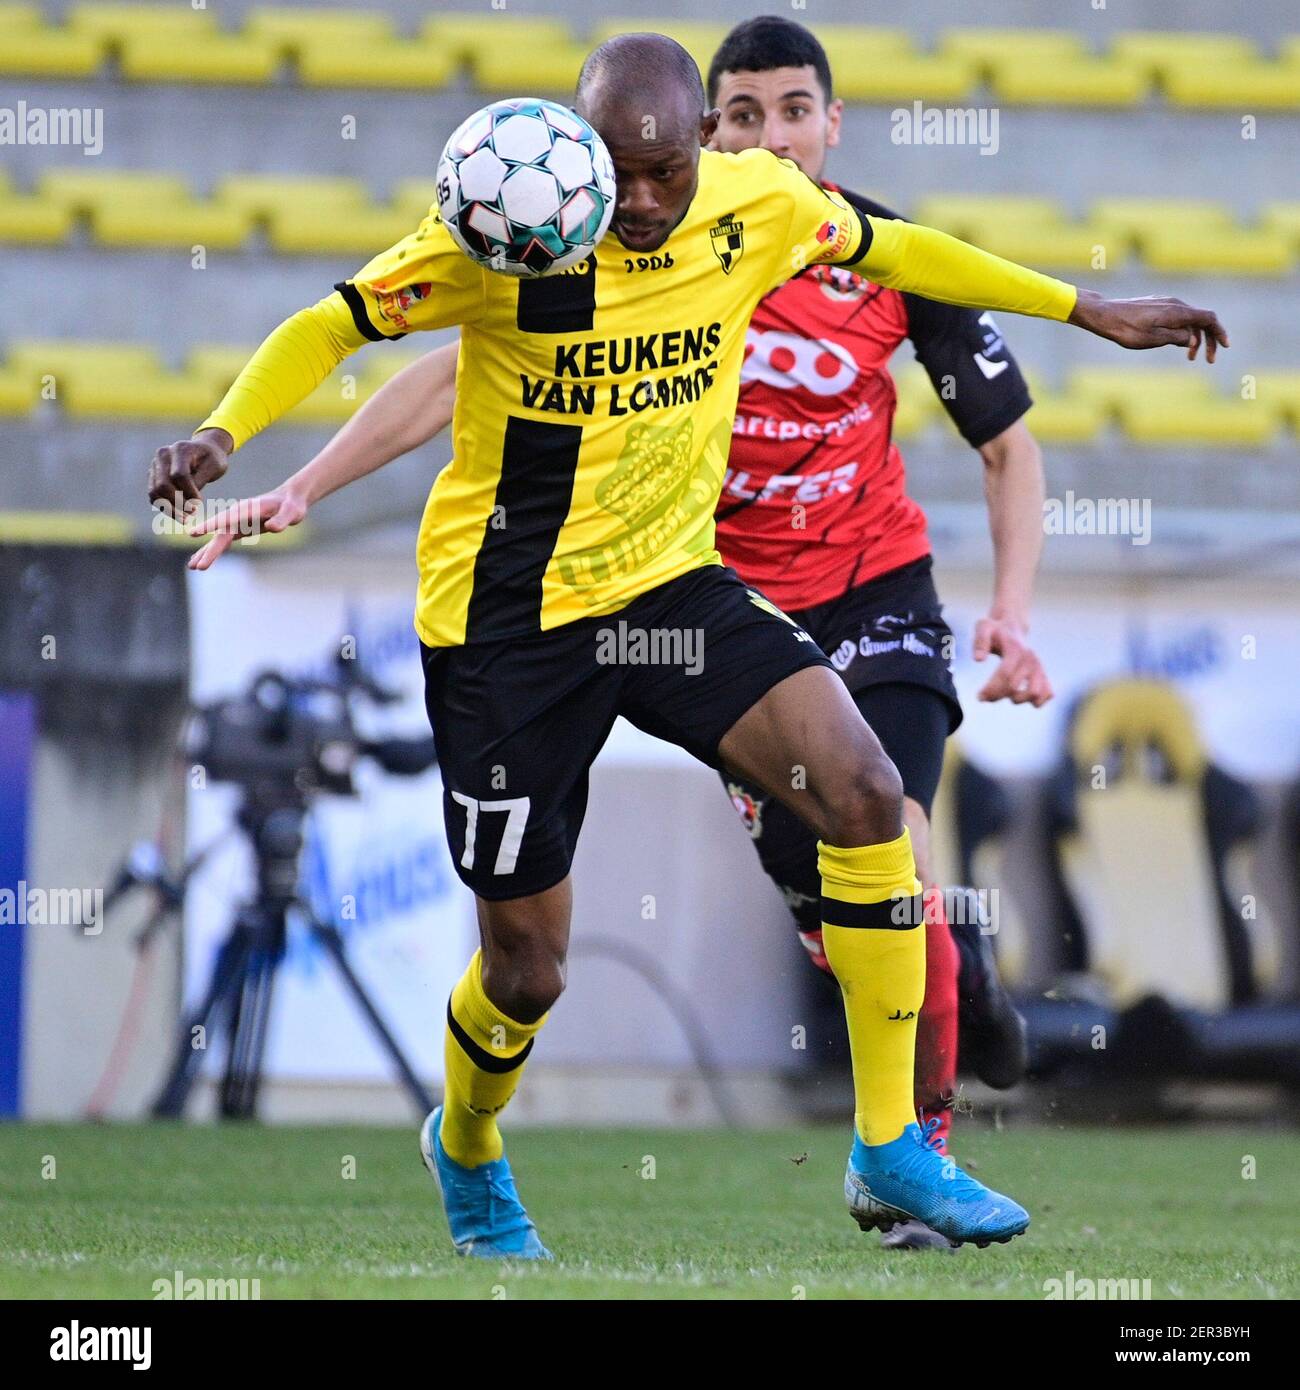 Lierse's Fessou Placca pictured in action during a soccer match between Lierse Kempenzonen and RFC Seraing, Sunday 28 February 2021 in Lier, on day 21 Stock Photo